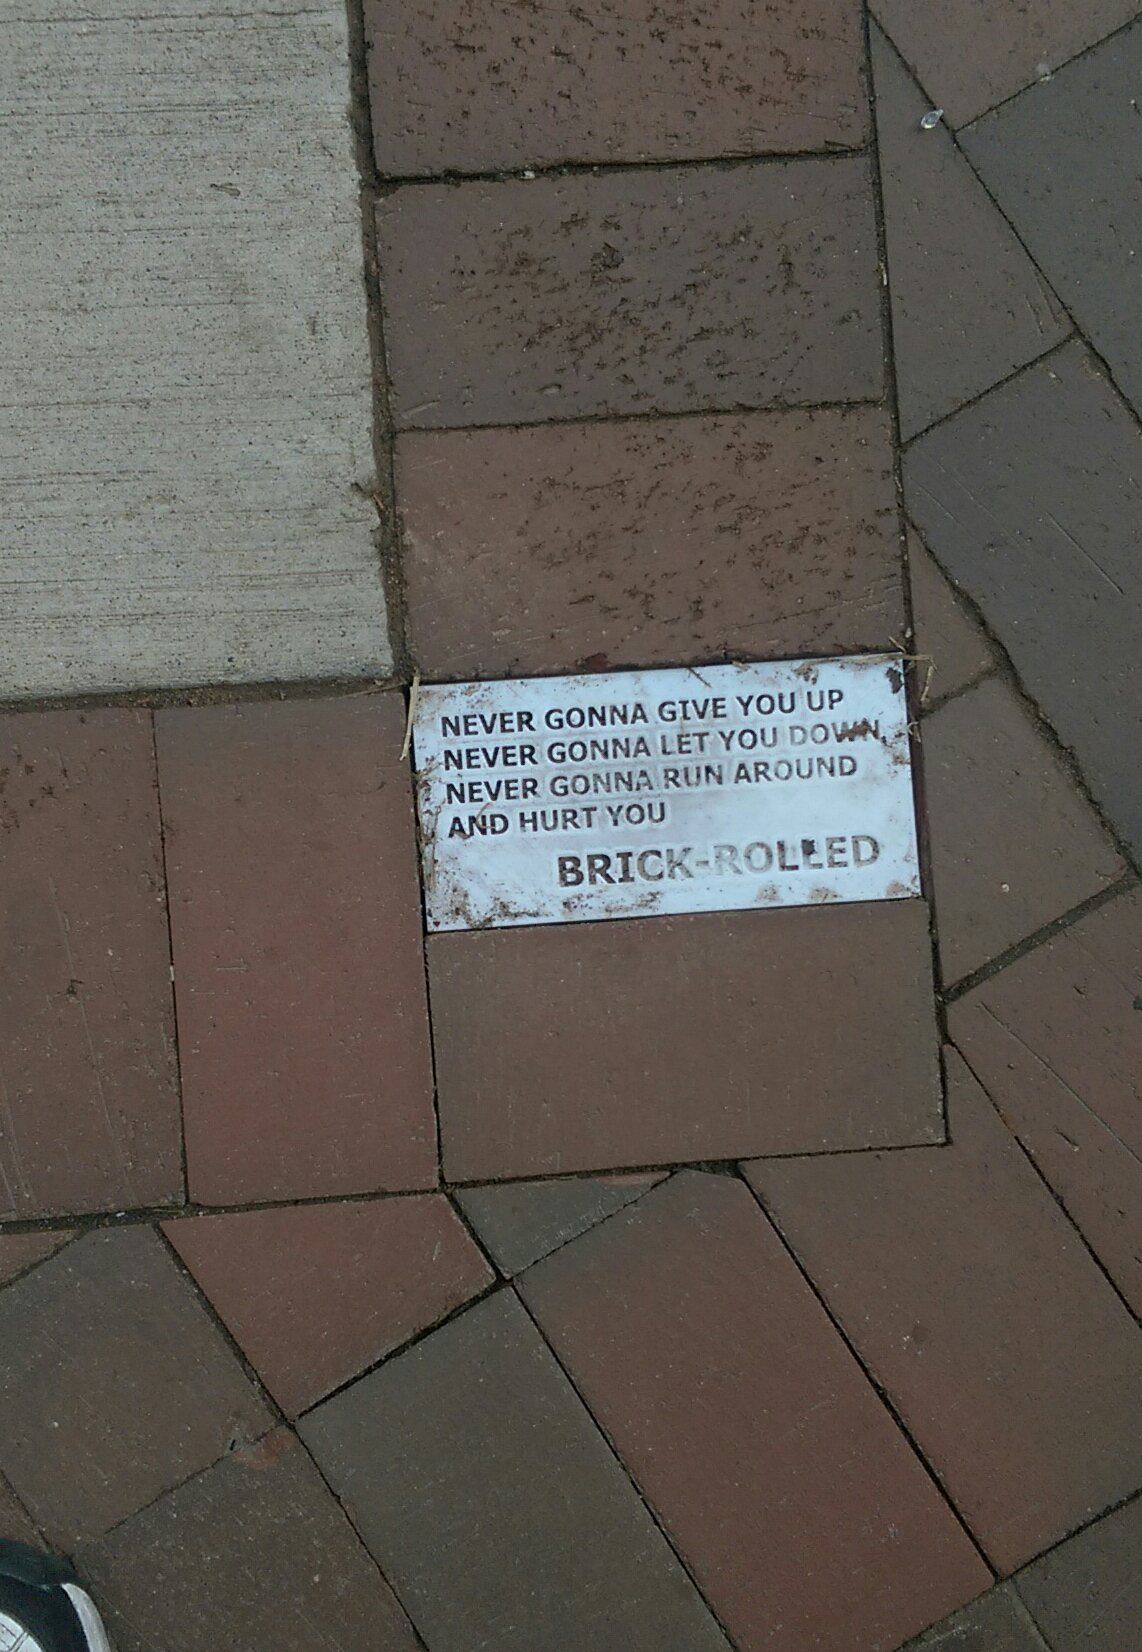 Someone filled in a missing brick with this